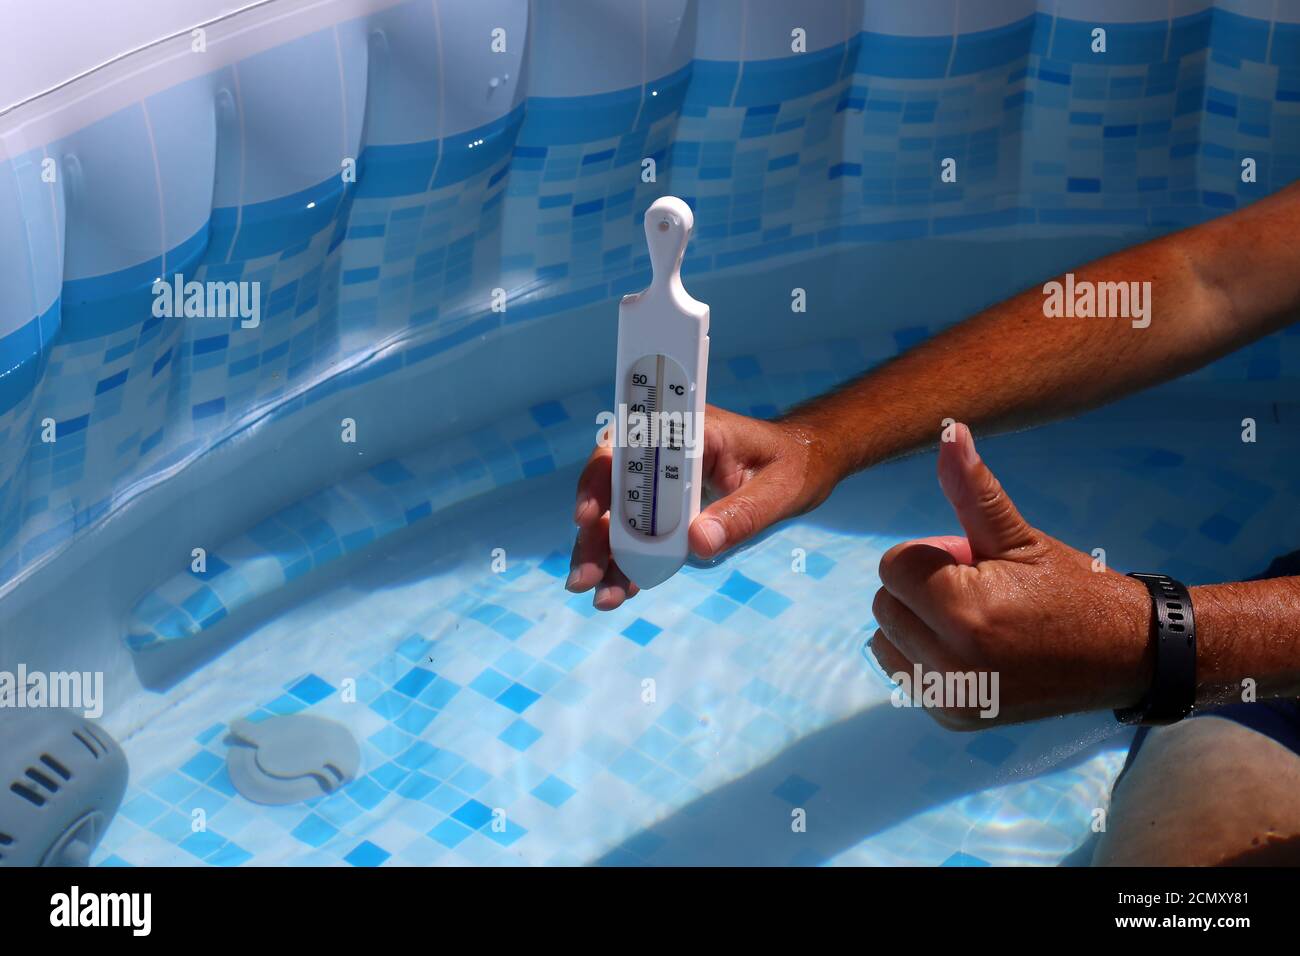 https://c8.alamy.com/comp/2CMXY81/person-measuring-a-temperature-of-the-pool-with-a-thermometer-2CMXY81.jpg